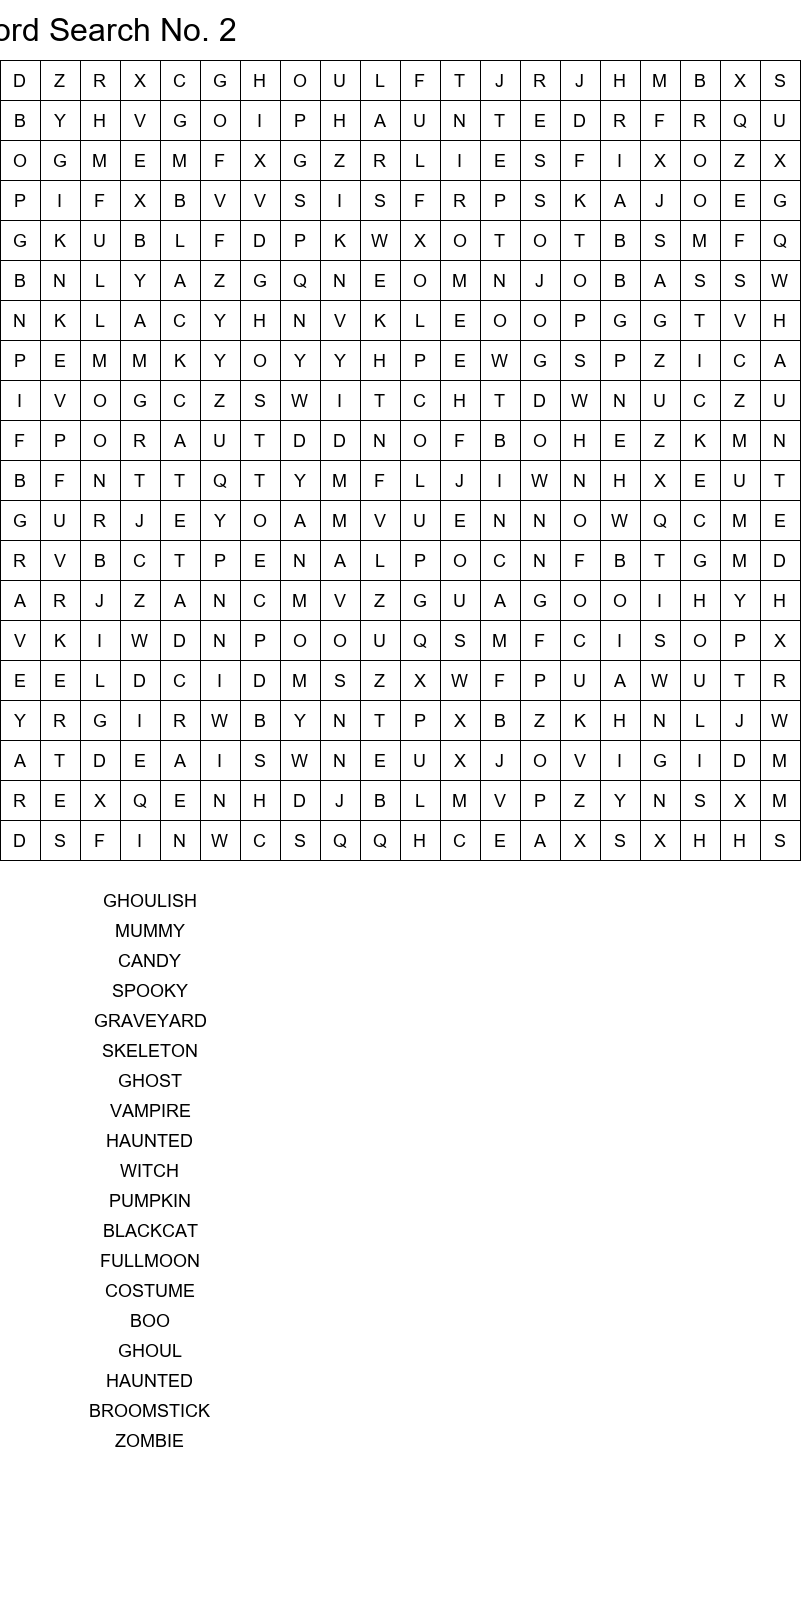 Top 20x20 Halloween word search with answers size 20x20 No 2